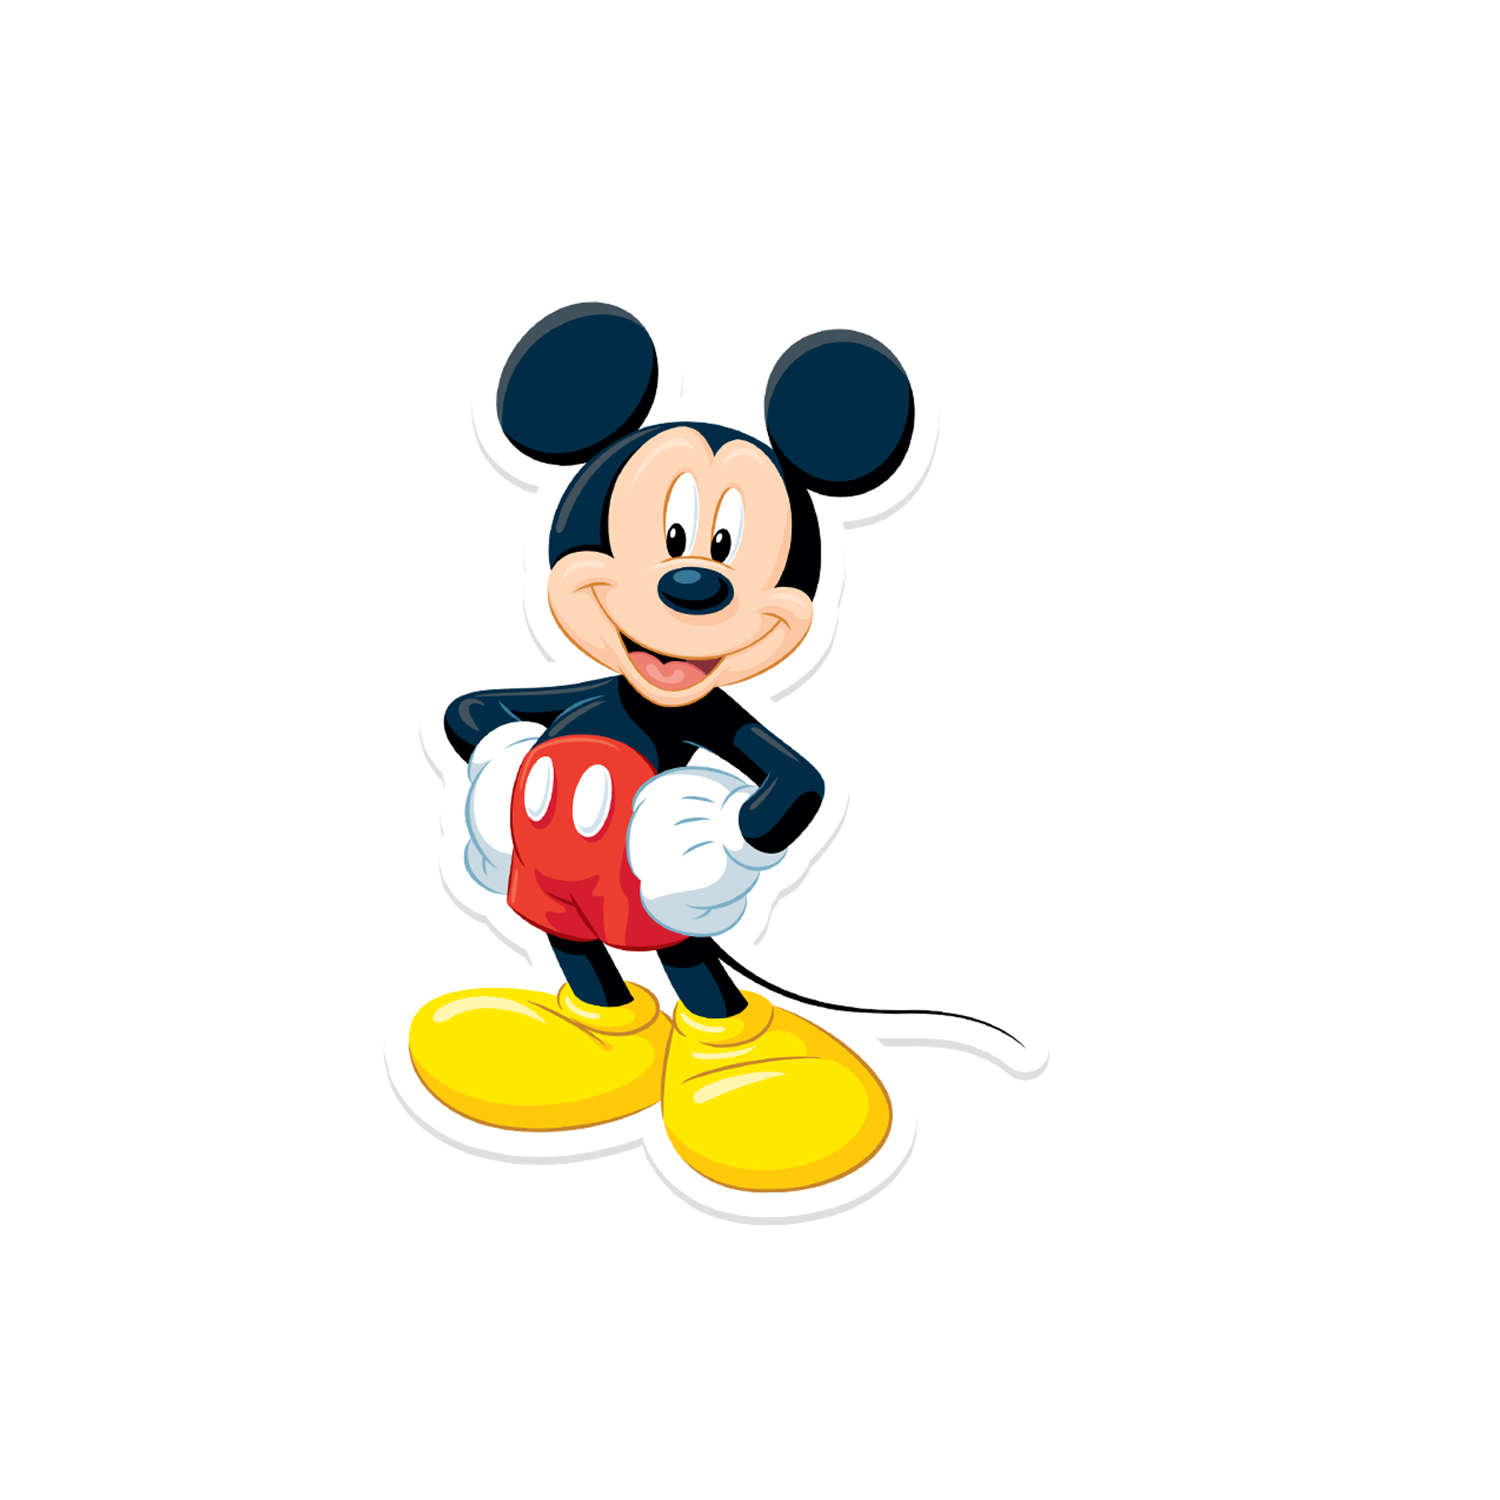 Magical Mickey Mouse Fridge Magnet: A Whimsical Touch for Your Kitchen Fridge Magnet